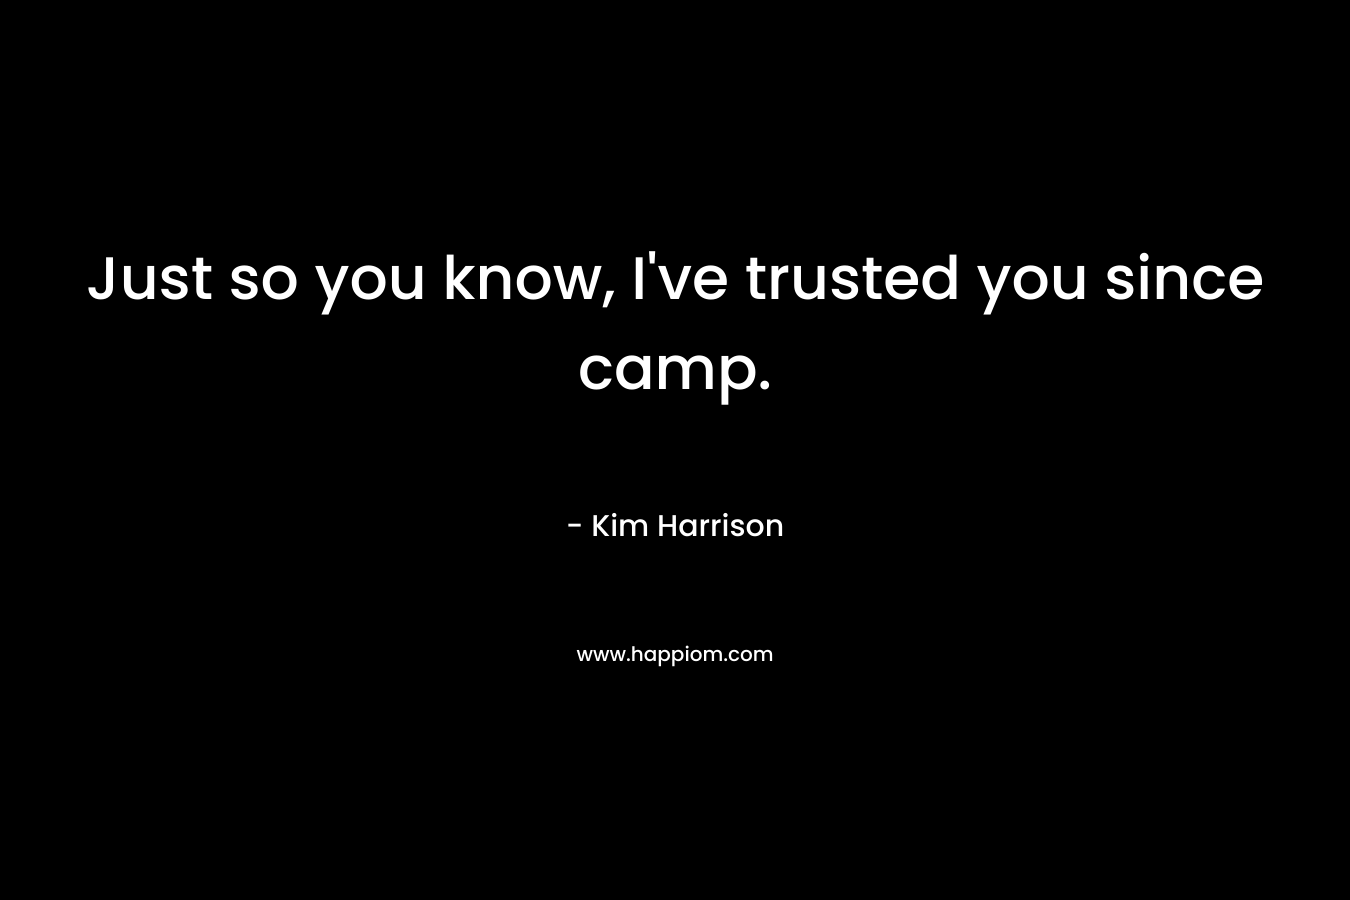 Just so you know, I've trusted you since camp.